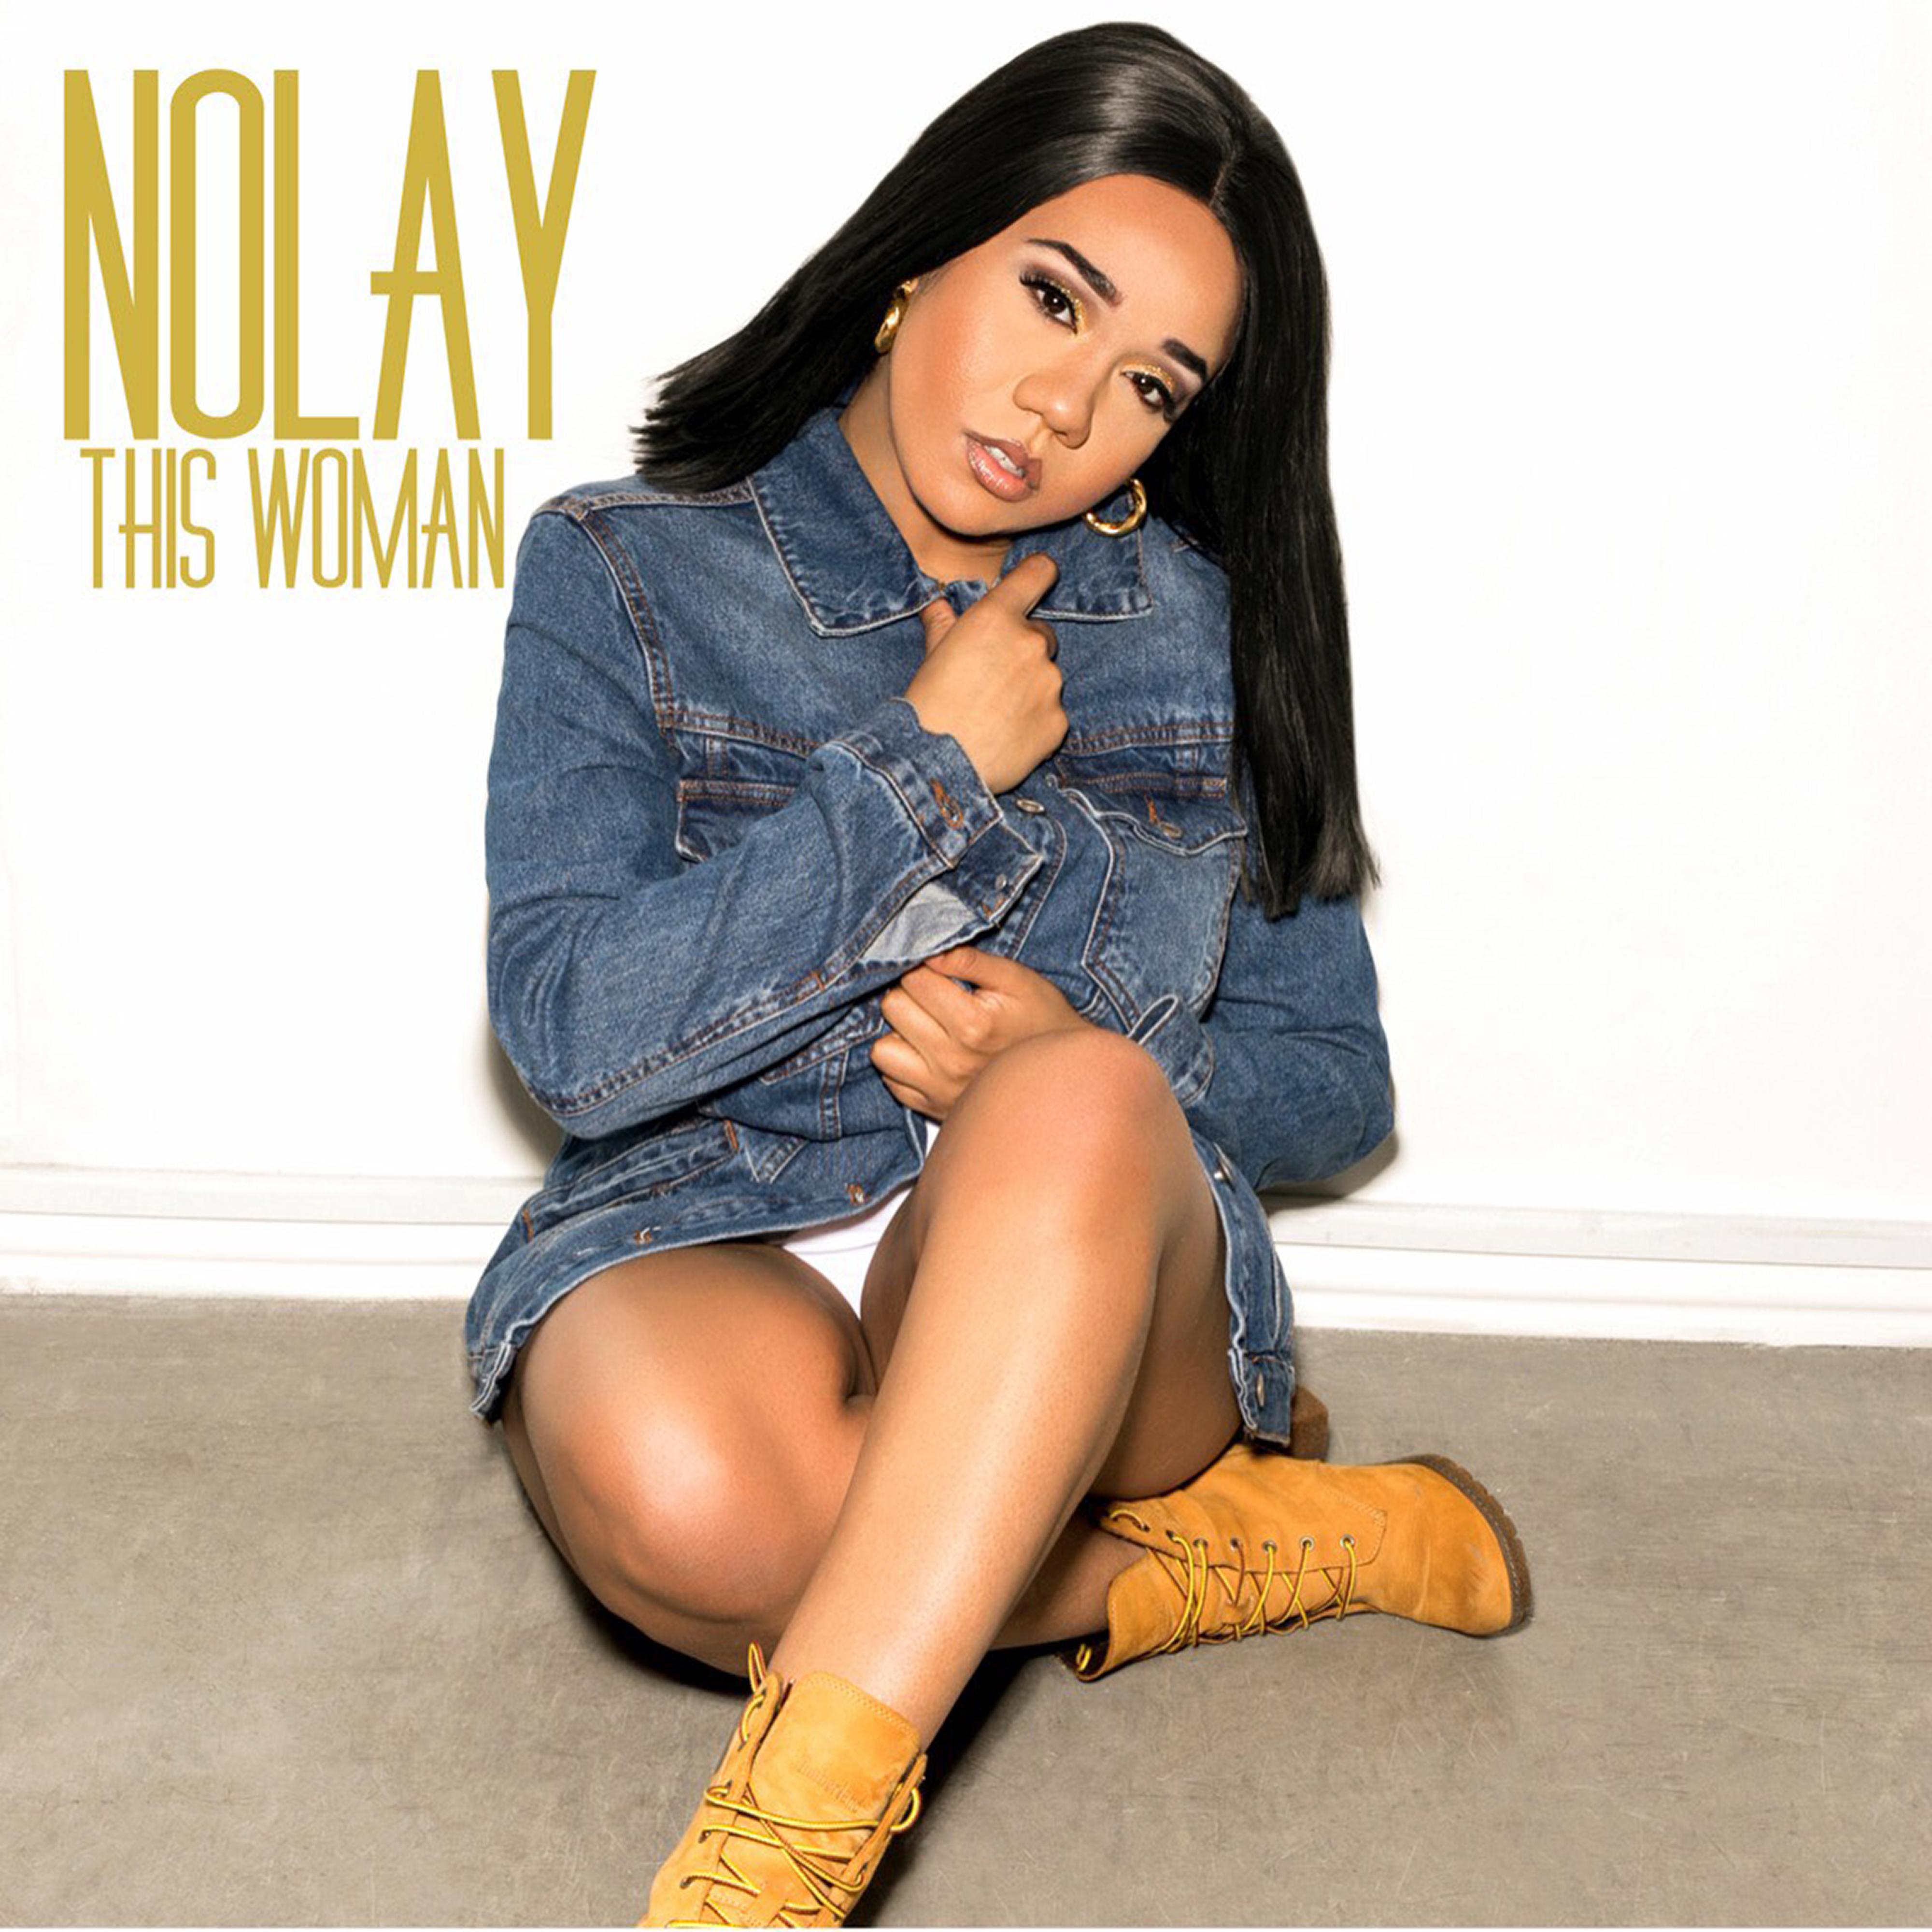 Nolay - Note to Self (Produced by Truth)